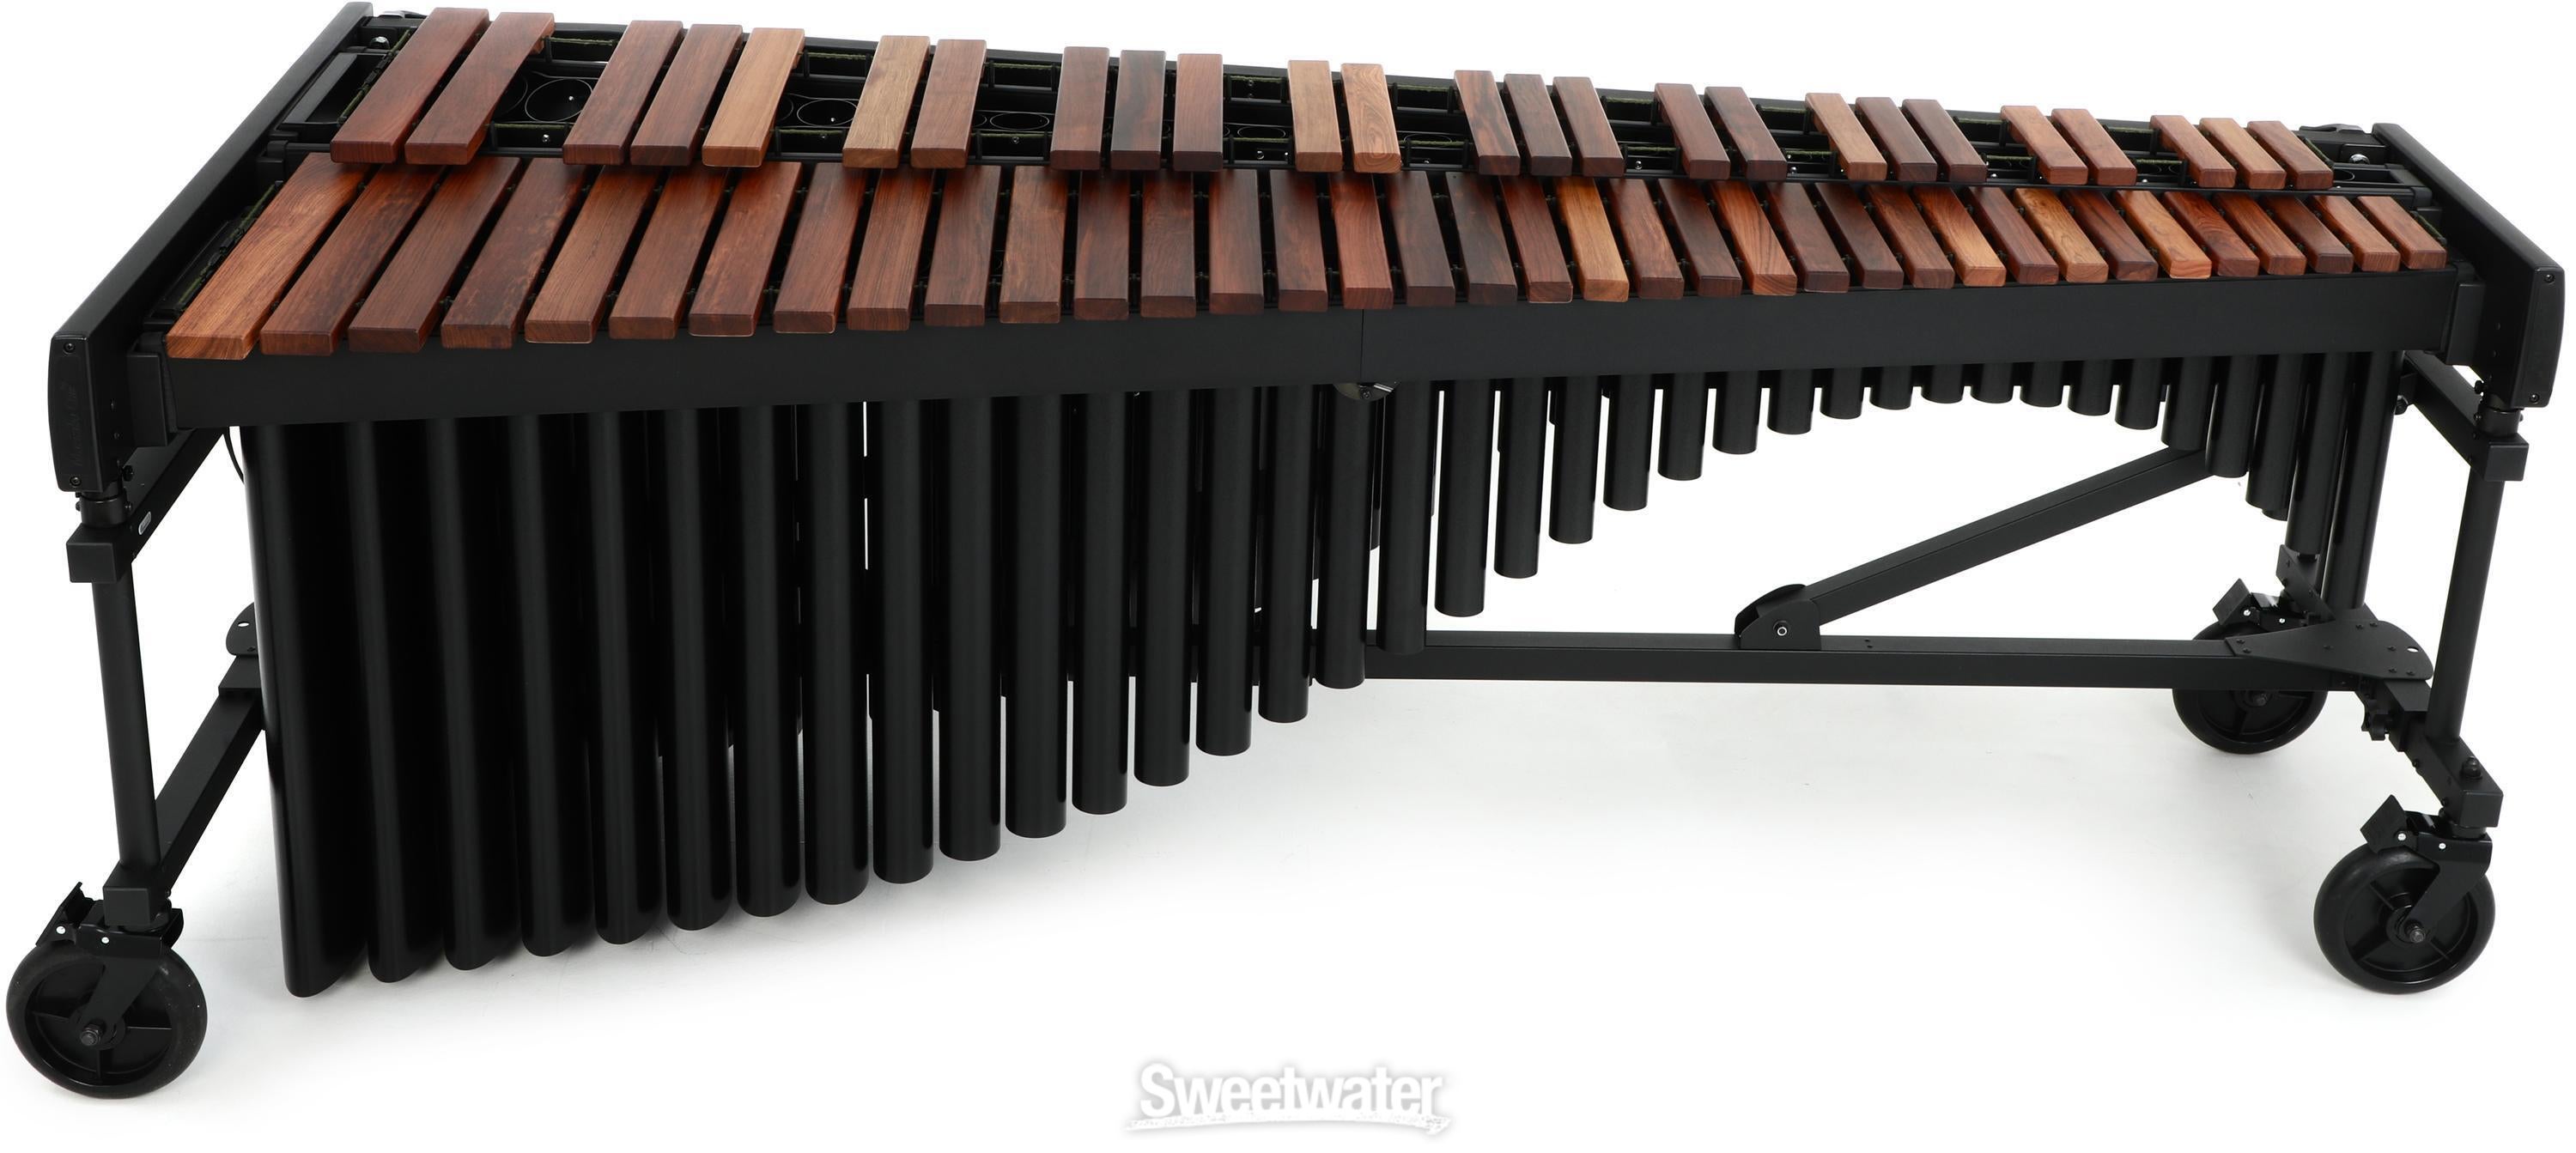 Marimba One 9611 5.0-octave Wave Marimba with 8-inch Casters - Black  Classic Resonators and Traditional Keyboard